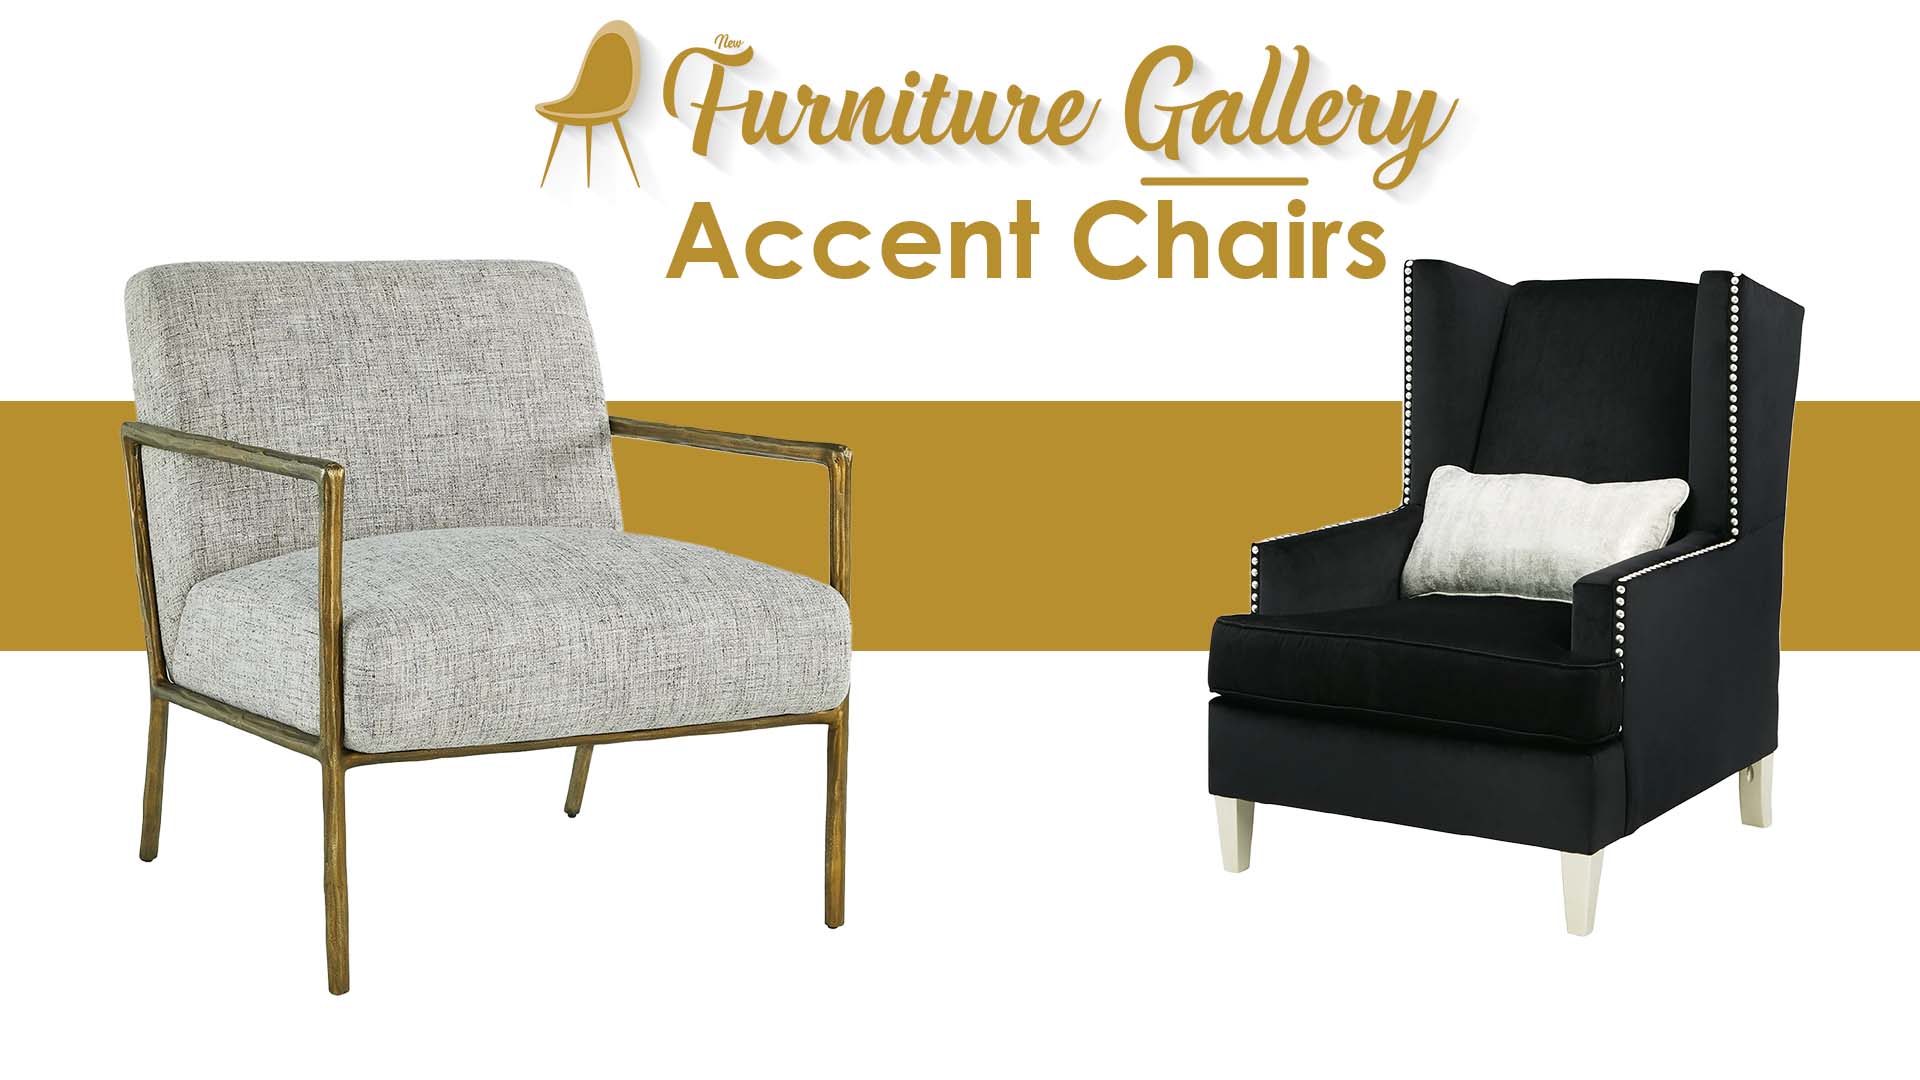 New Furniture Gallery image of Accent chairs 